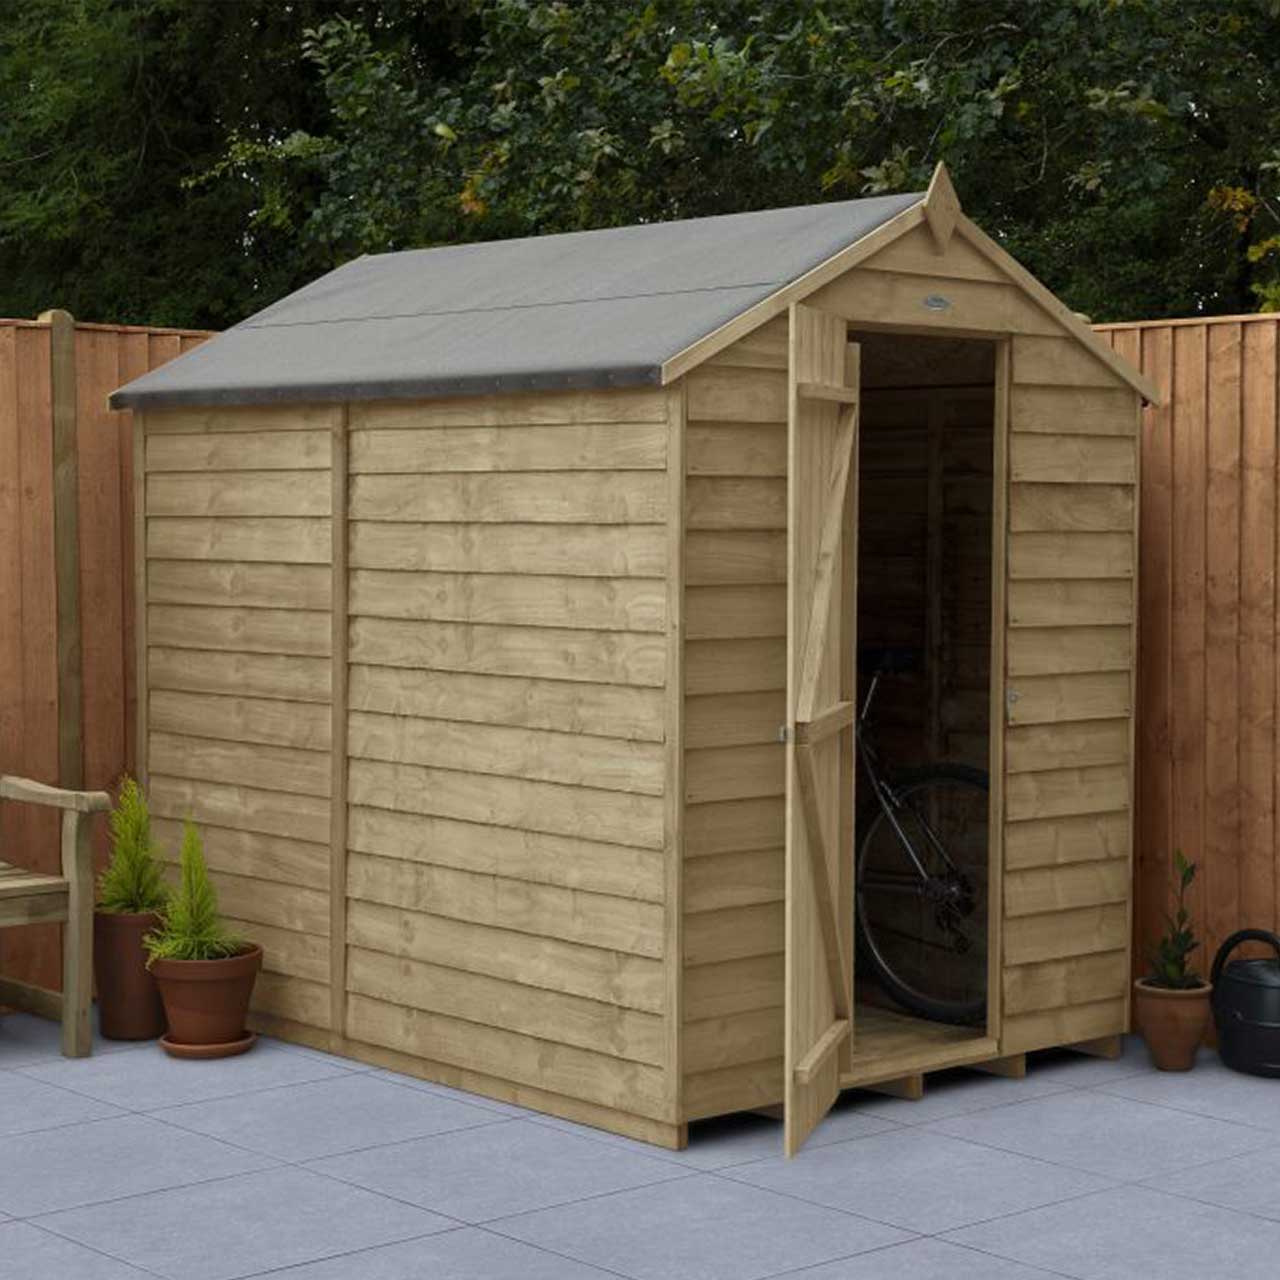 Overlap Pressure Treated 7×5 Apex Shed – No Window